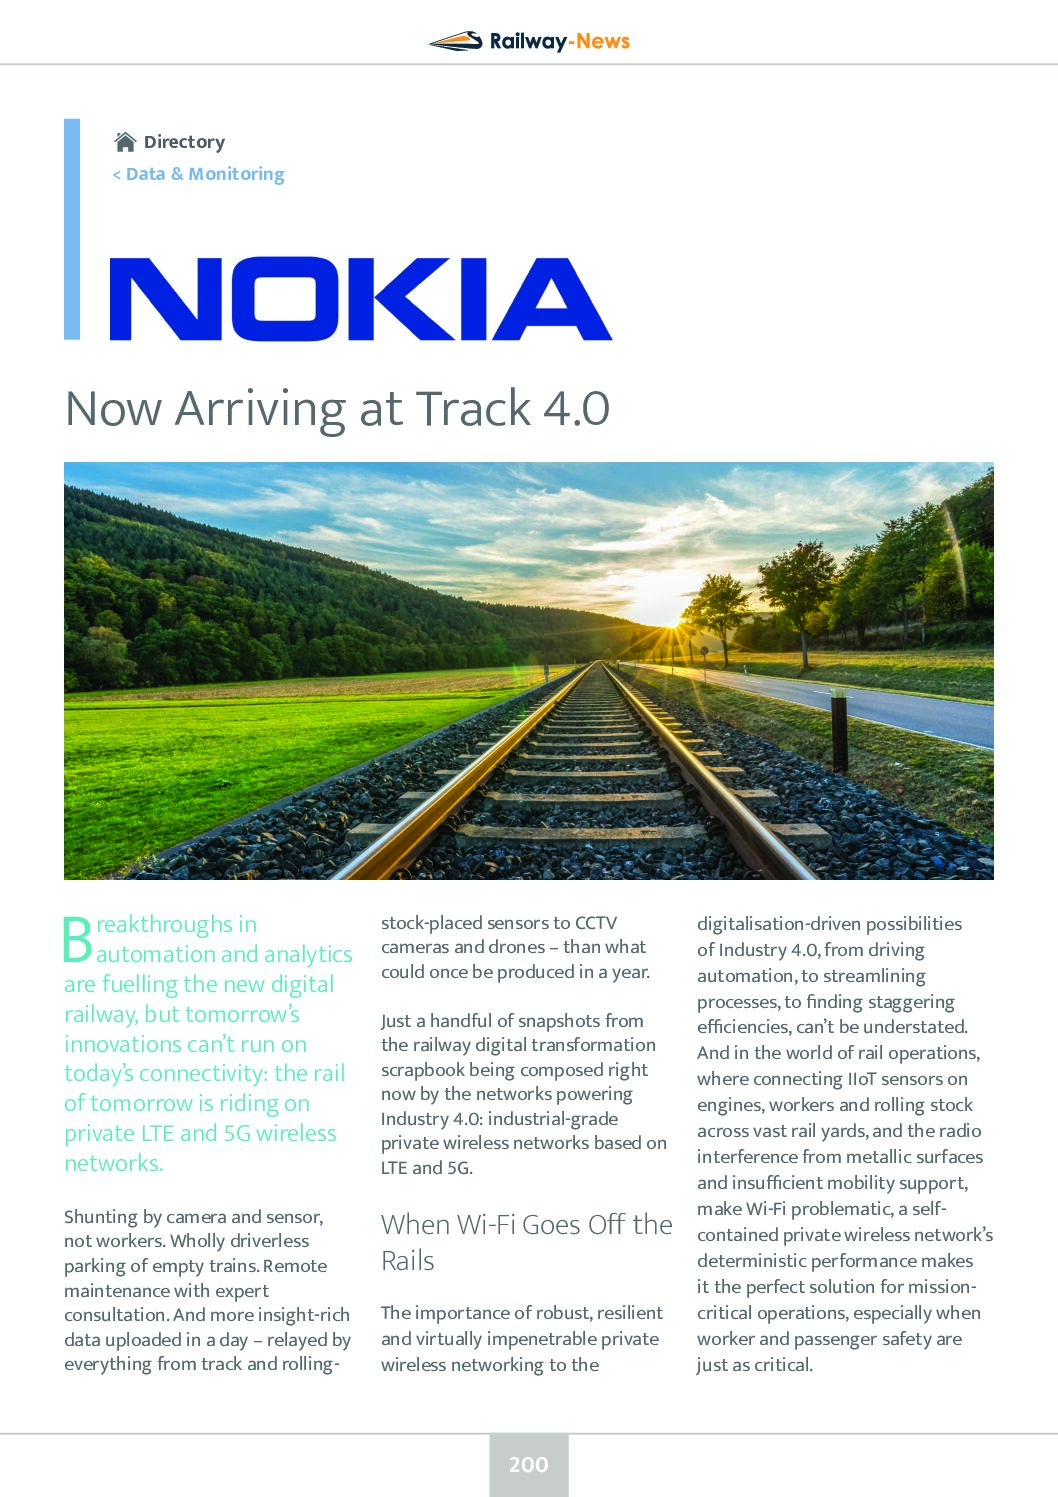 Now Arriving at Track 4.0